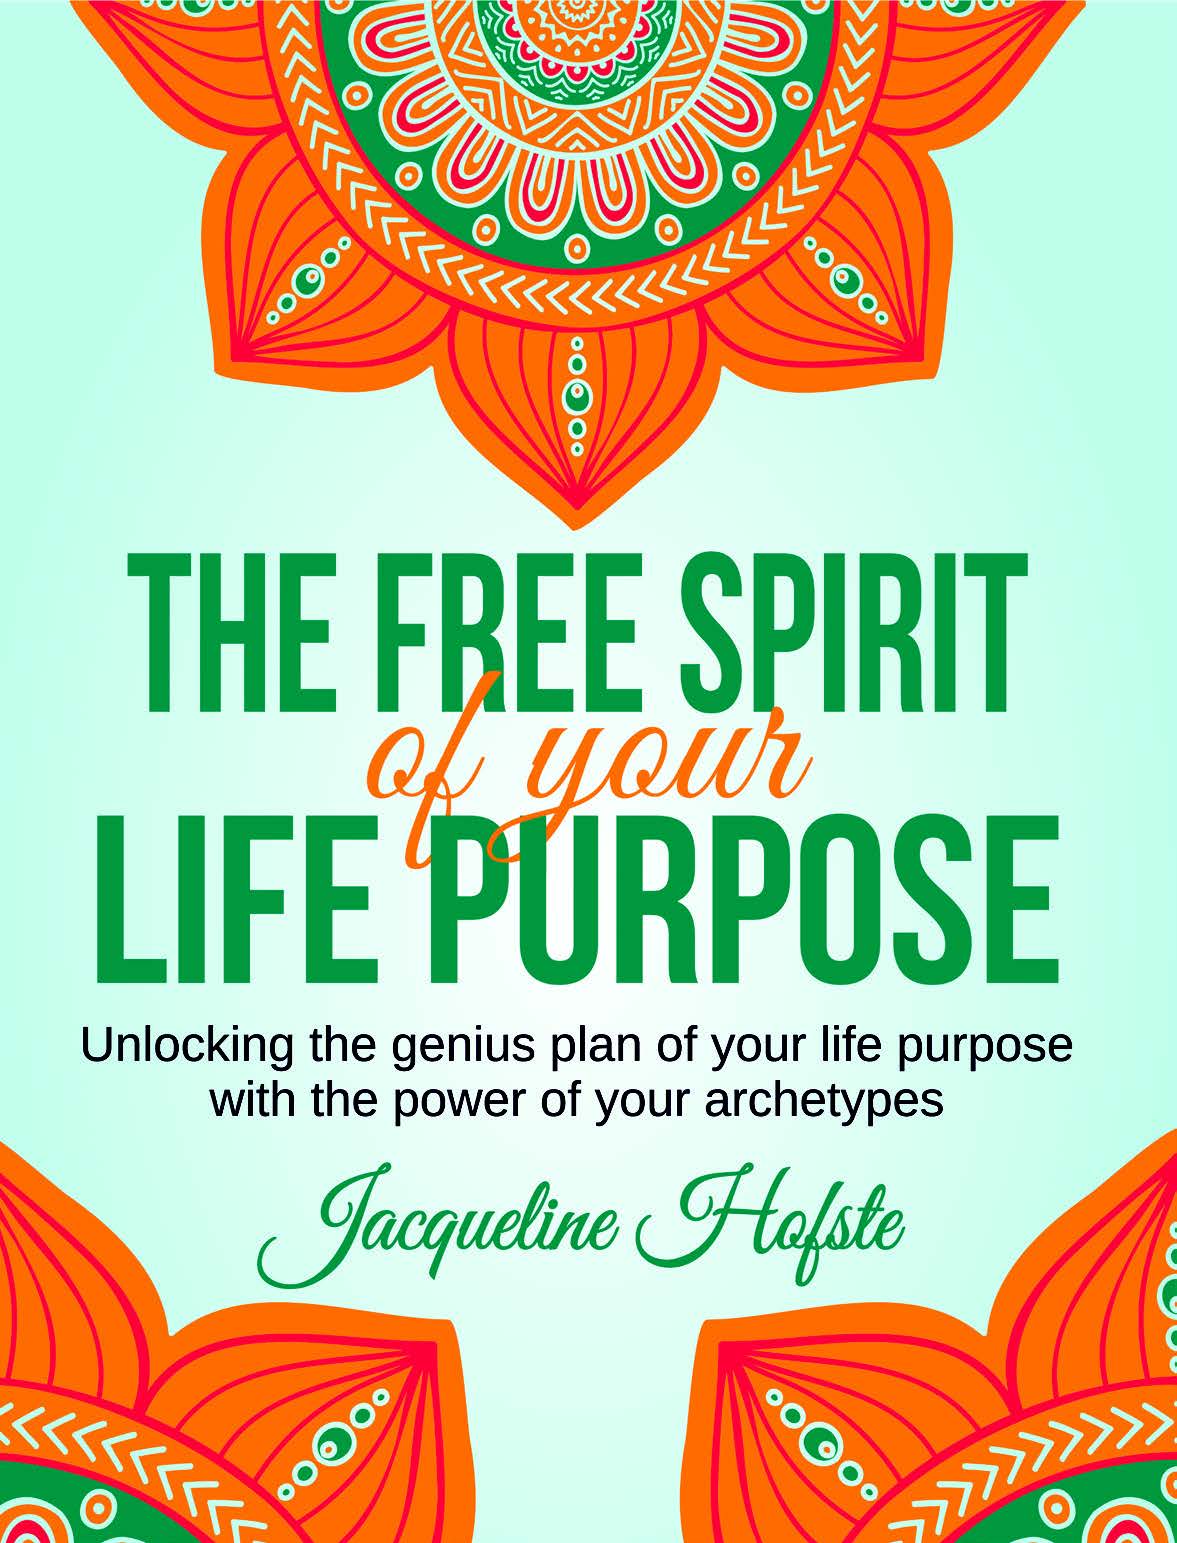 The Free Spirit Of Your Life Purpose – unlocking the genius plan of your life purpose with the power of your archetypes by Jacqueline Hofste